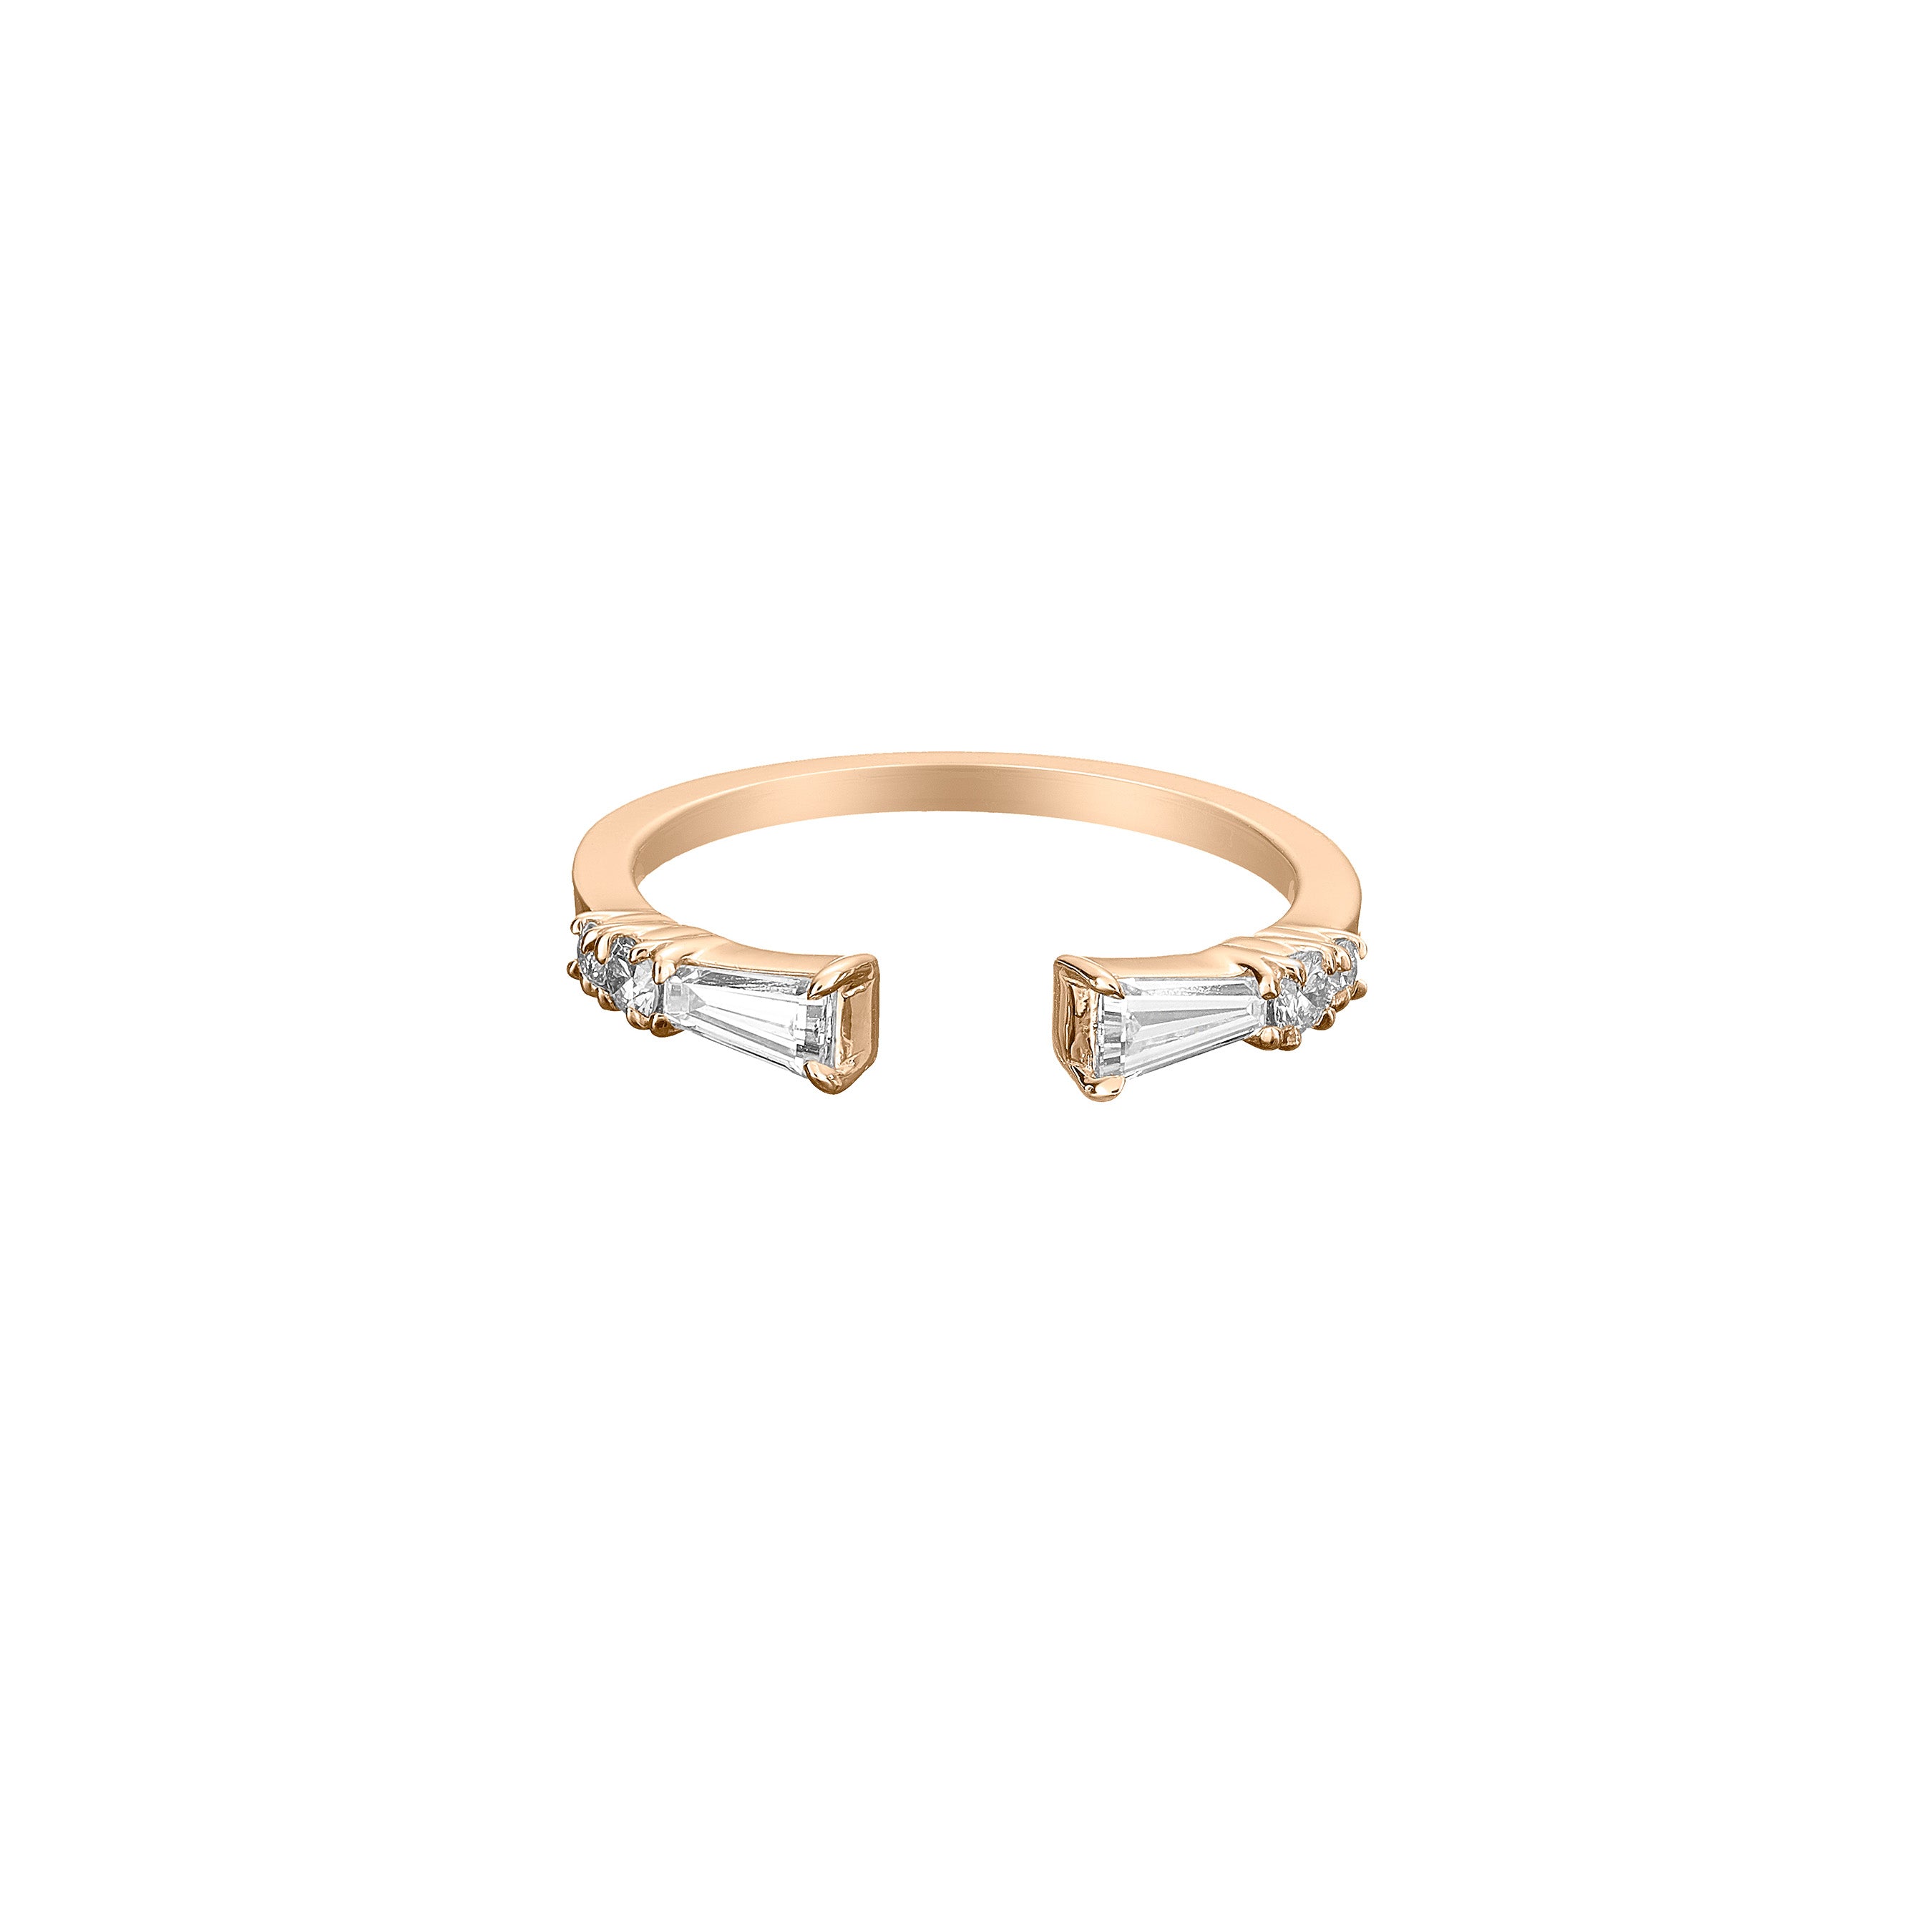  Upside Down Diamond Double Band, 18k Gold, Baguette Diamond, Unique Ring, Statement Ring, Gift, Stackable Ring